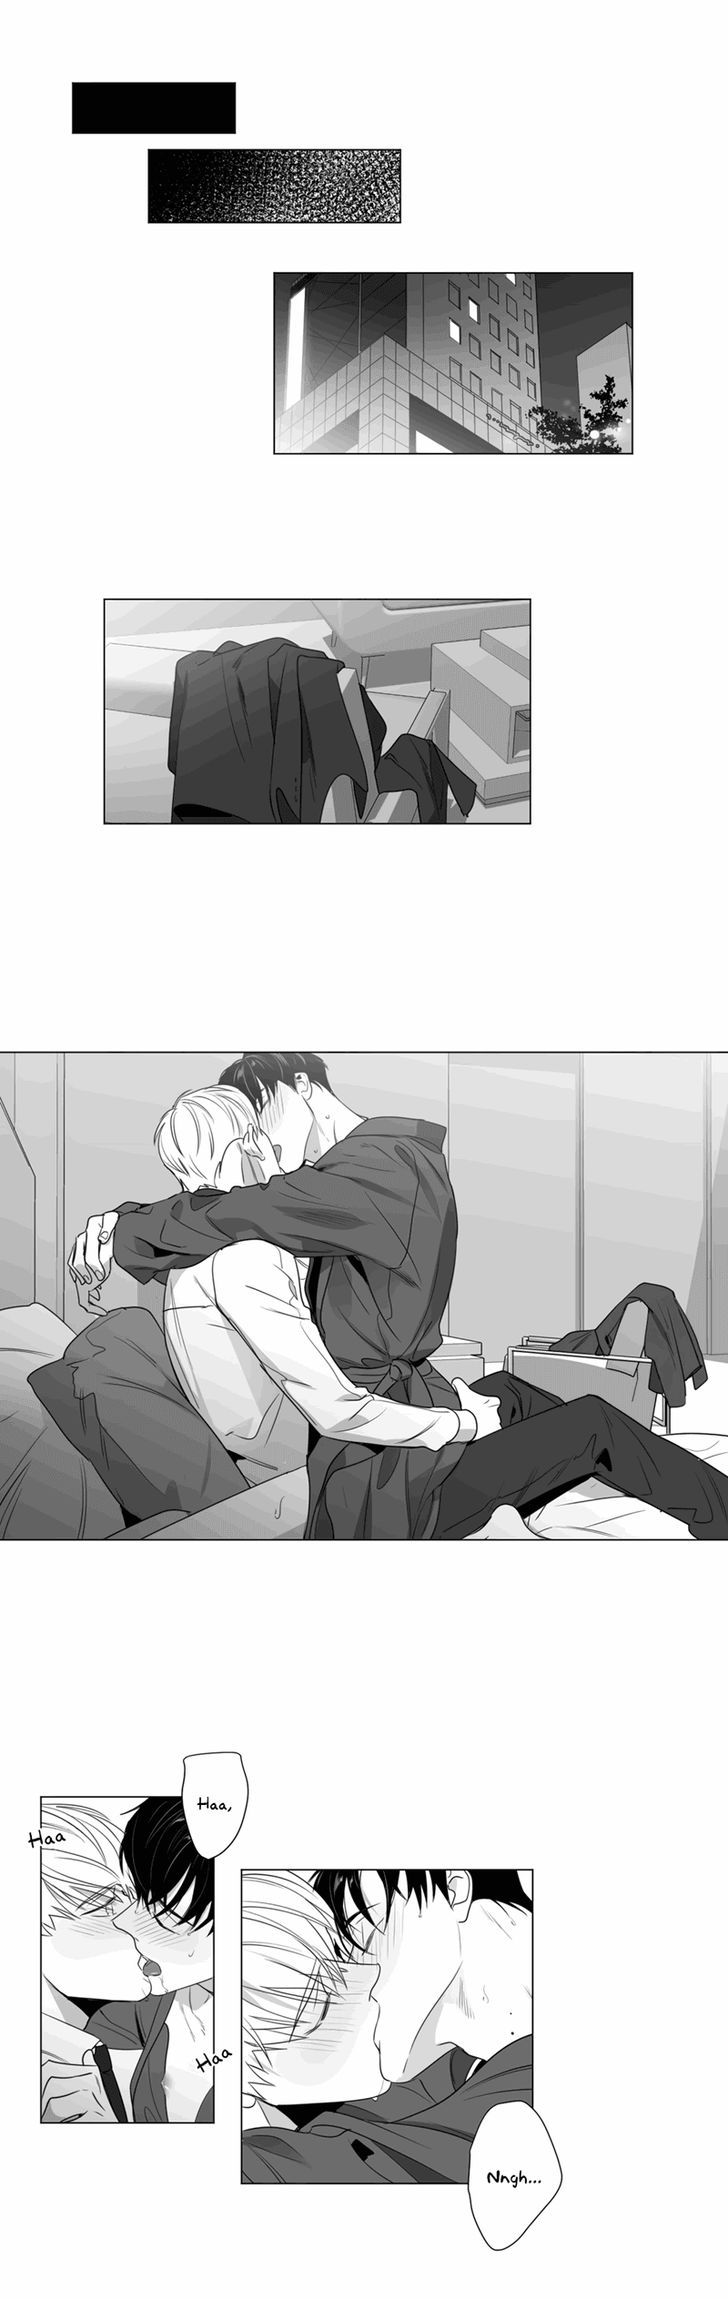 Lover Boy (Lezhin) Chapter 034 page 4